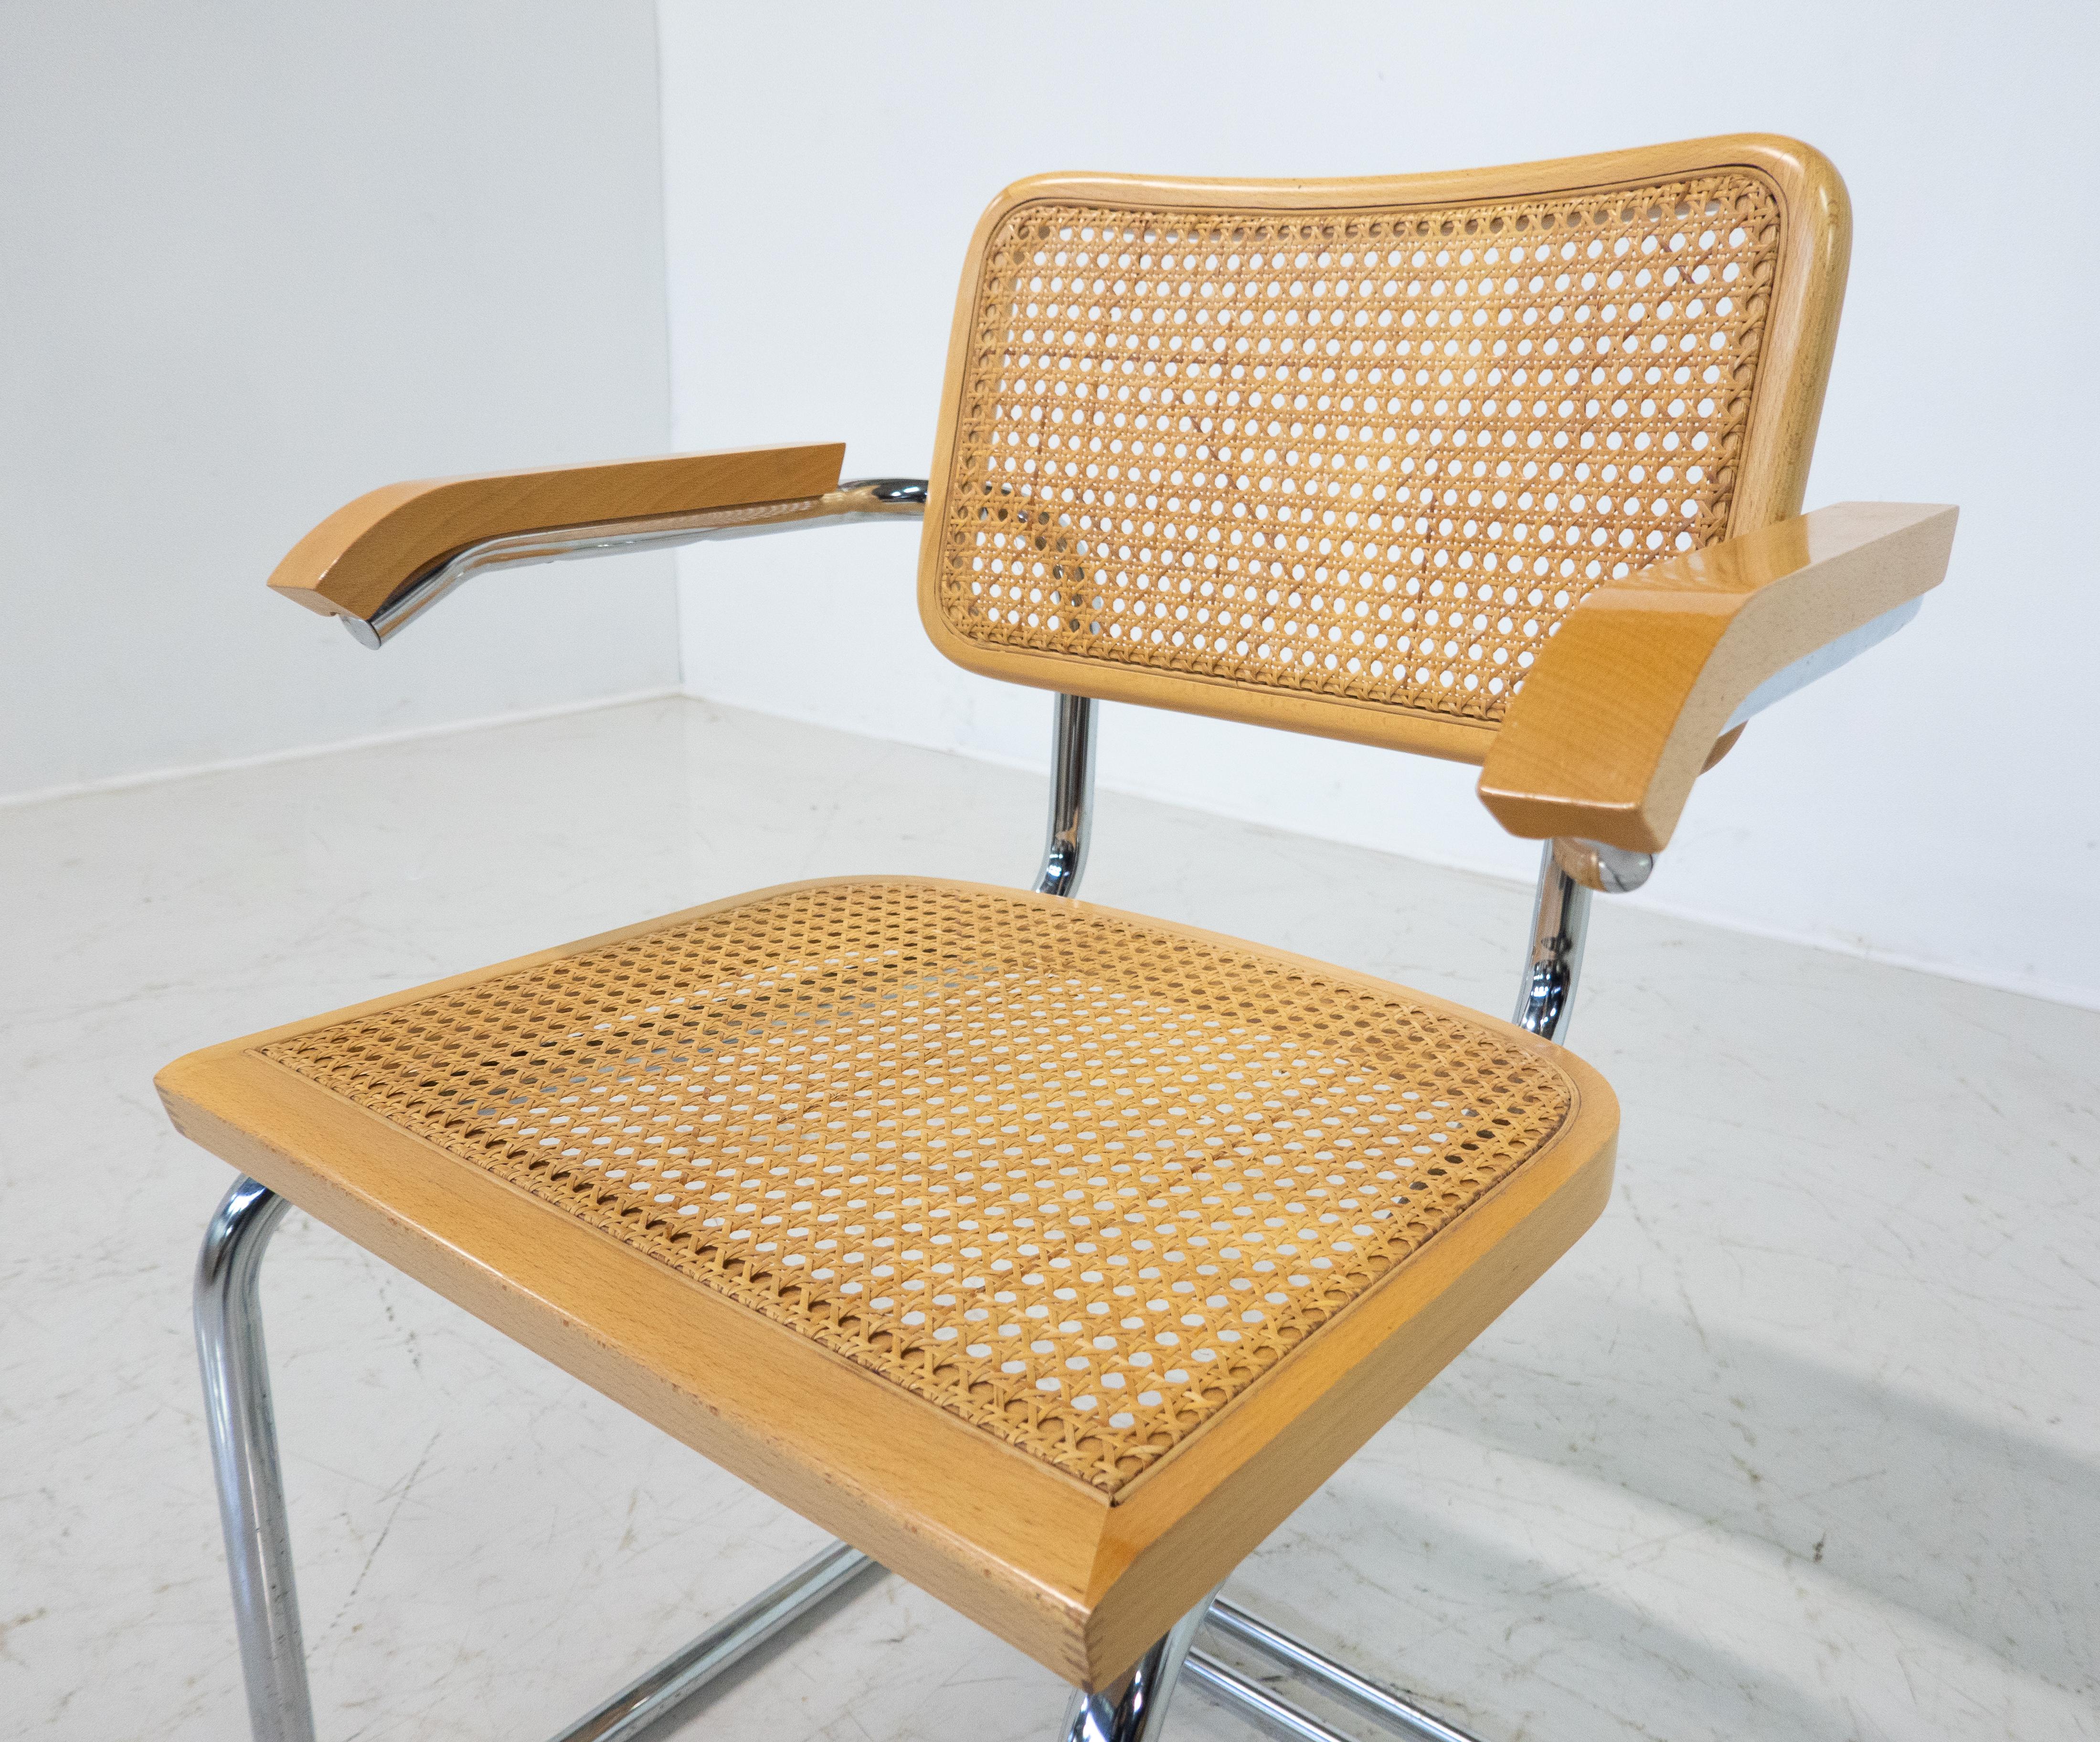 Late 20th Century Mid-Century Modern Armchair, Marcel Breuer Style , Italy - 4 available For Sale